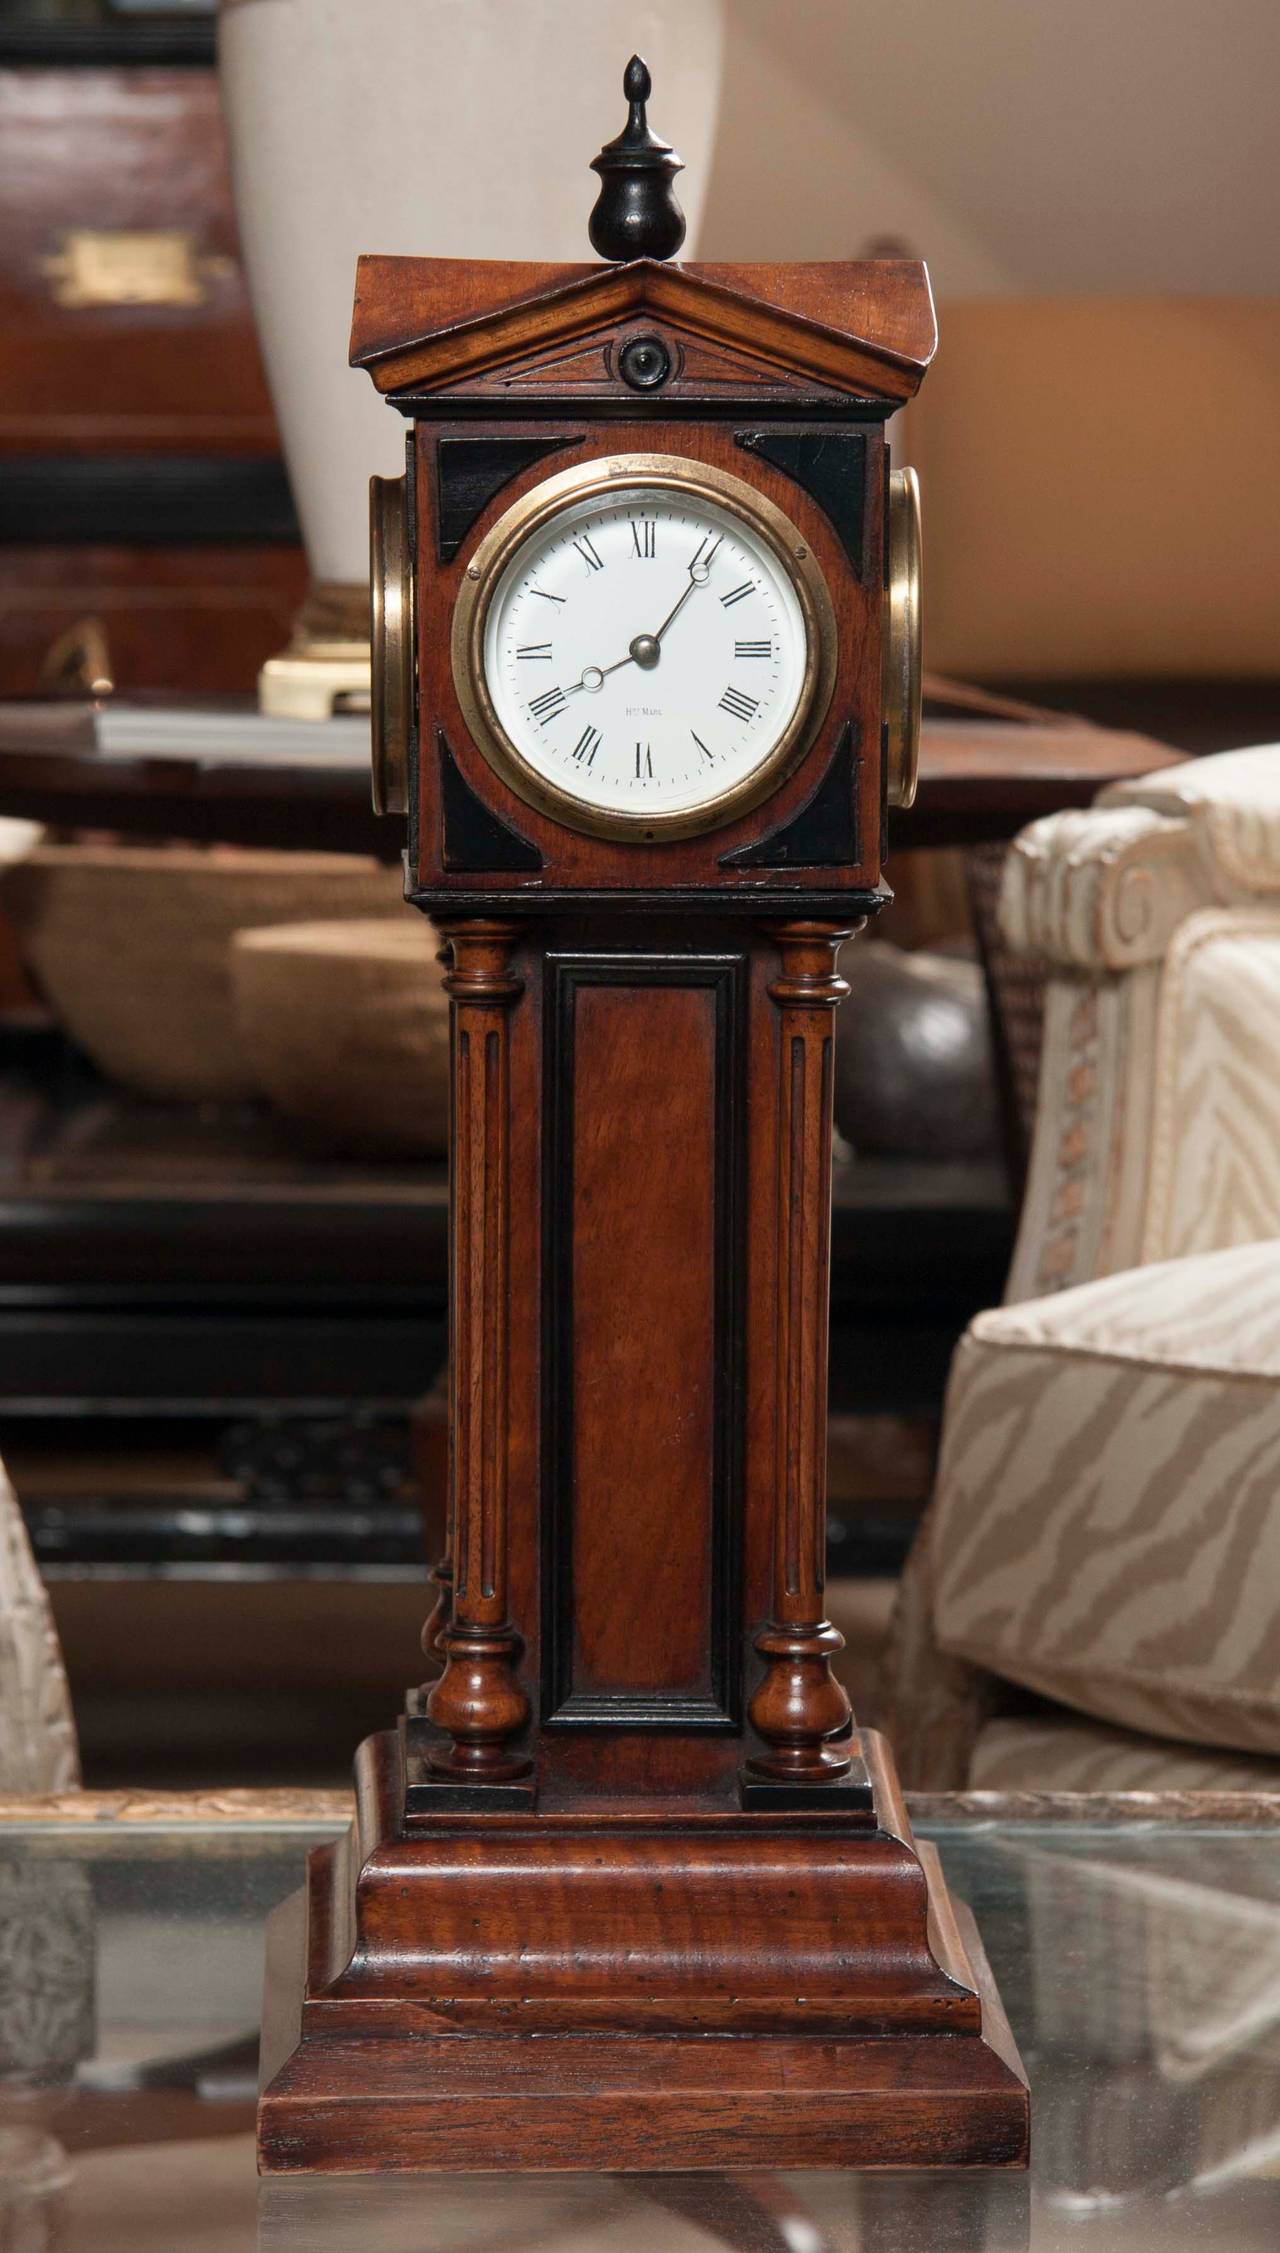 Walnut 4 dial tower table clock by Patent, Blumberg & Co, Ltd., Paris & London. Walnut clock tower style case with turned and fluted corner columns, raised panels and ebonized trim; has 4 identical 3 inch porcelain dials signed 